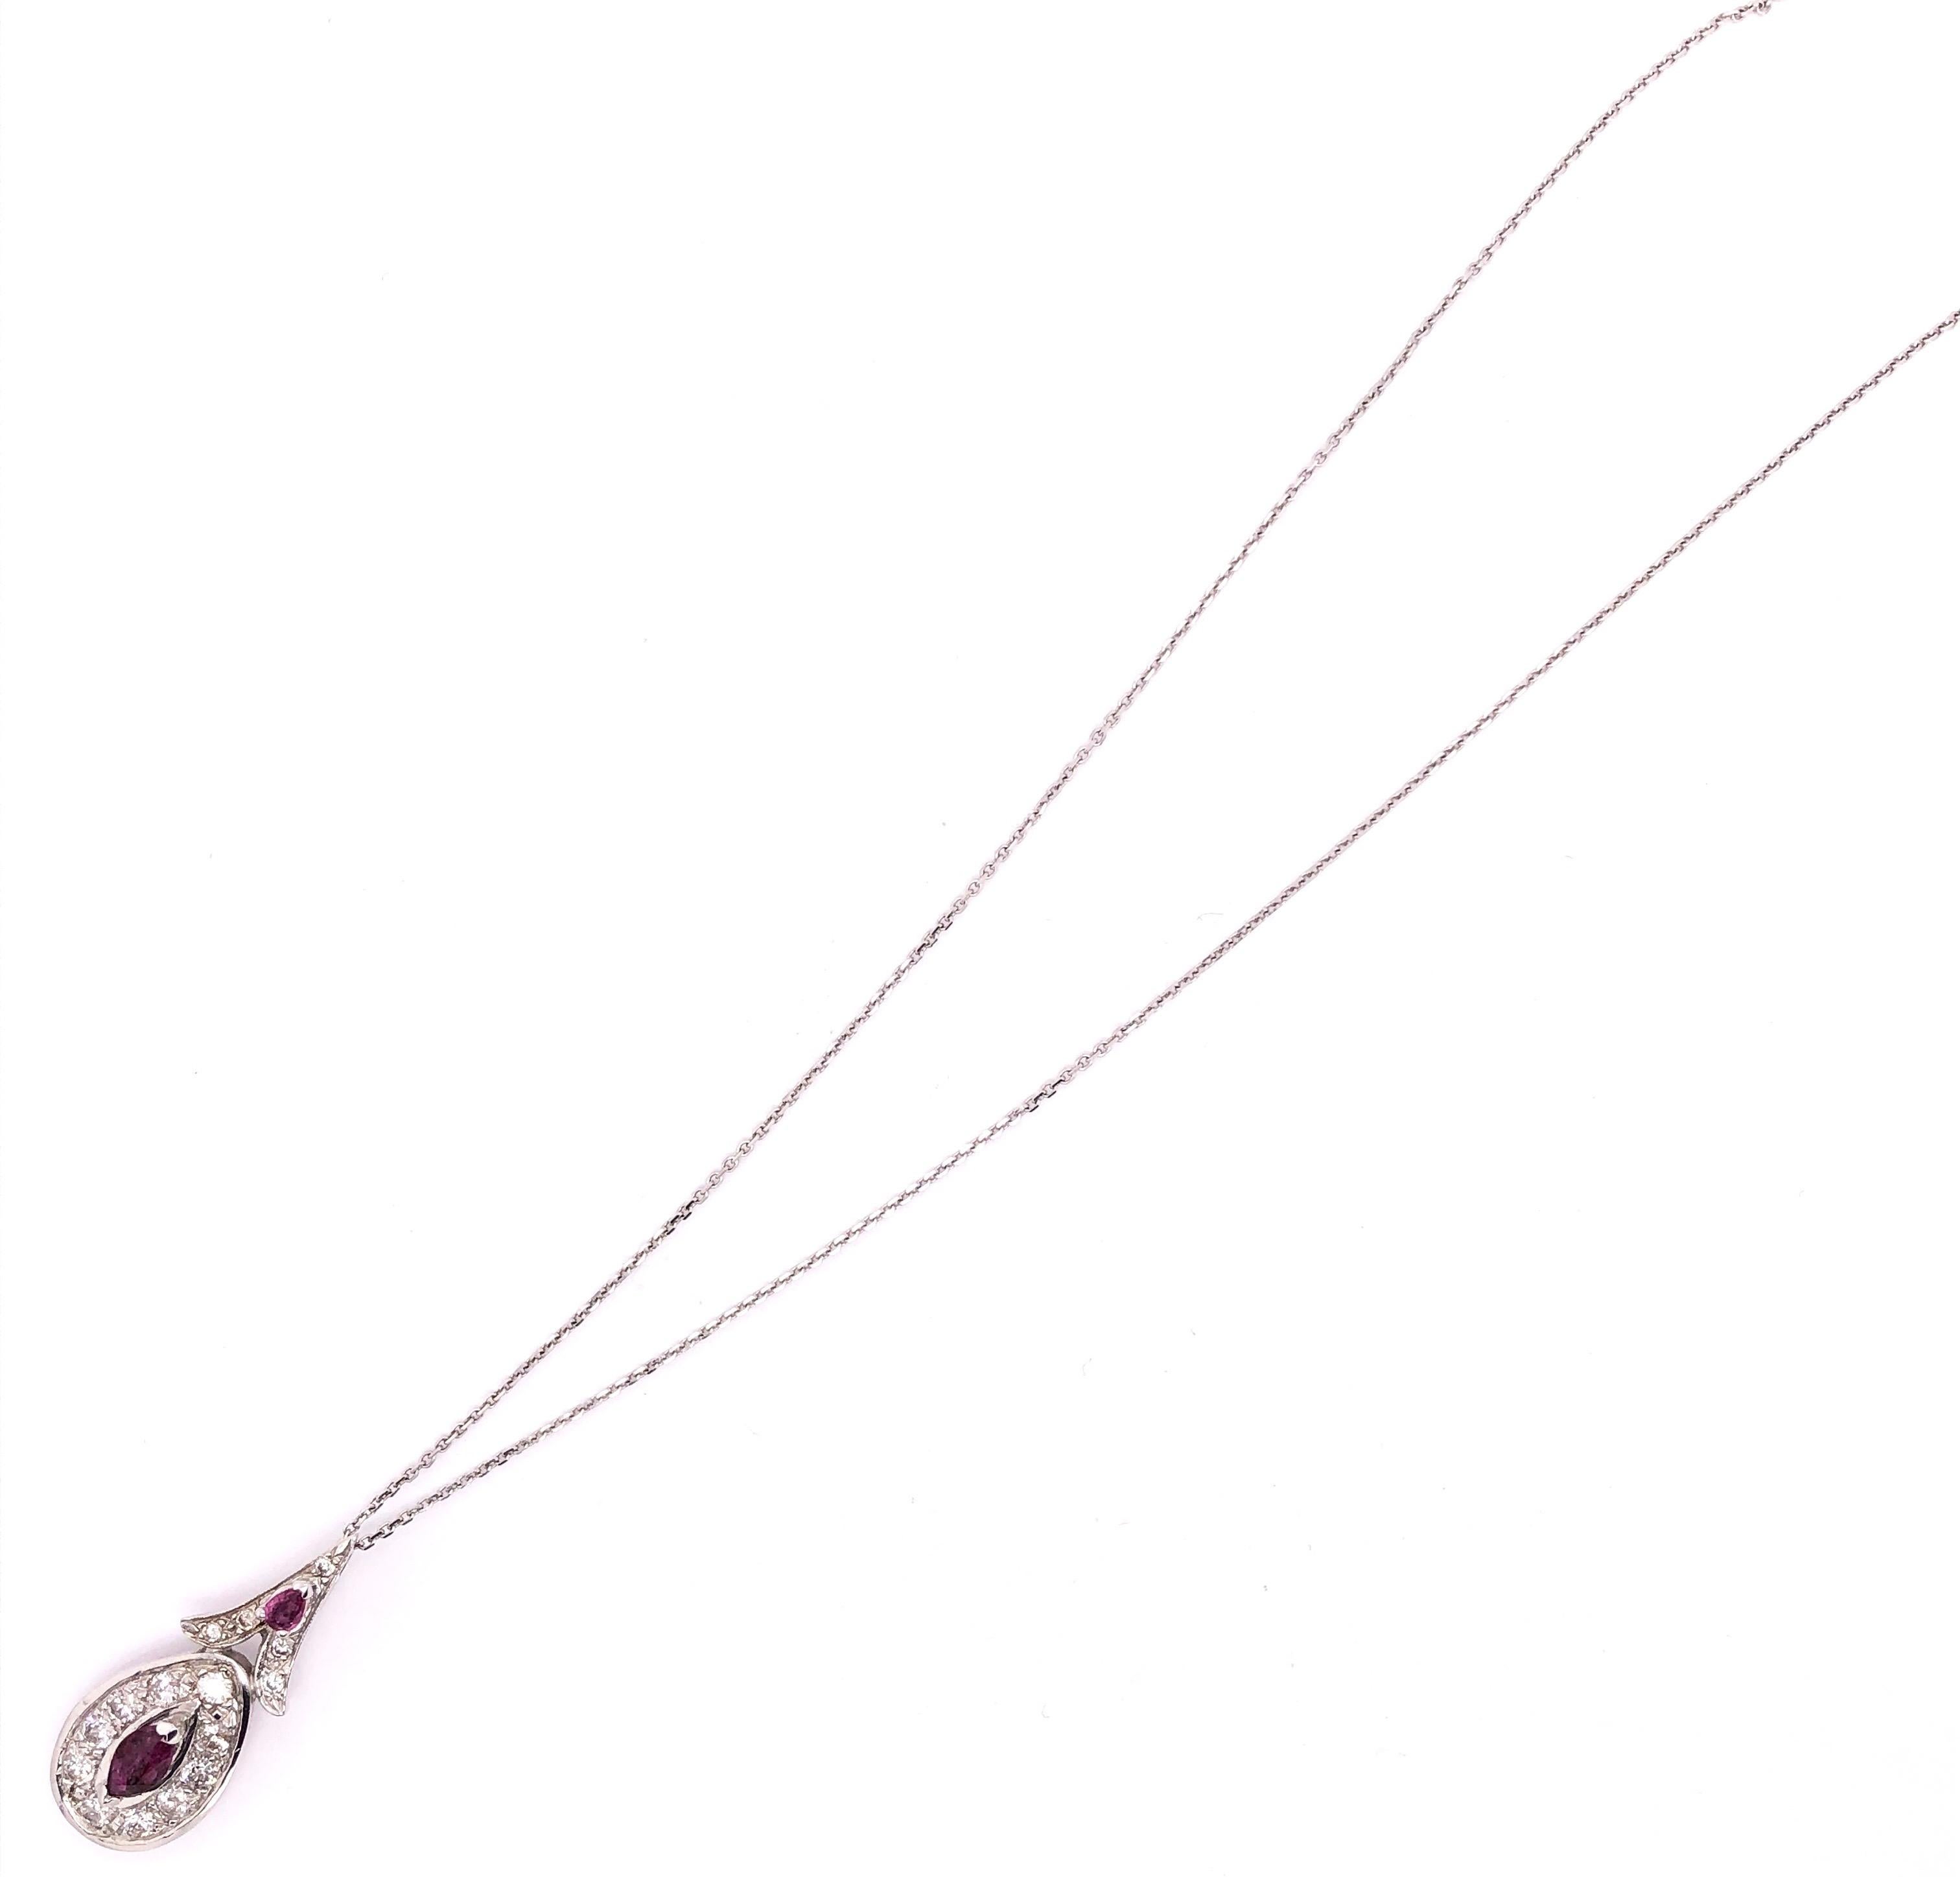 Women's or Men's 14 Karat White Gold Necklace with Diamond and Ruby Pendant 1.25 TDW For Sale